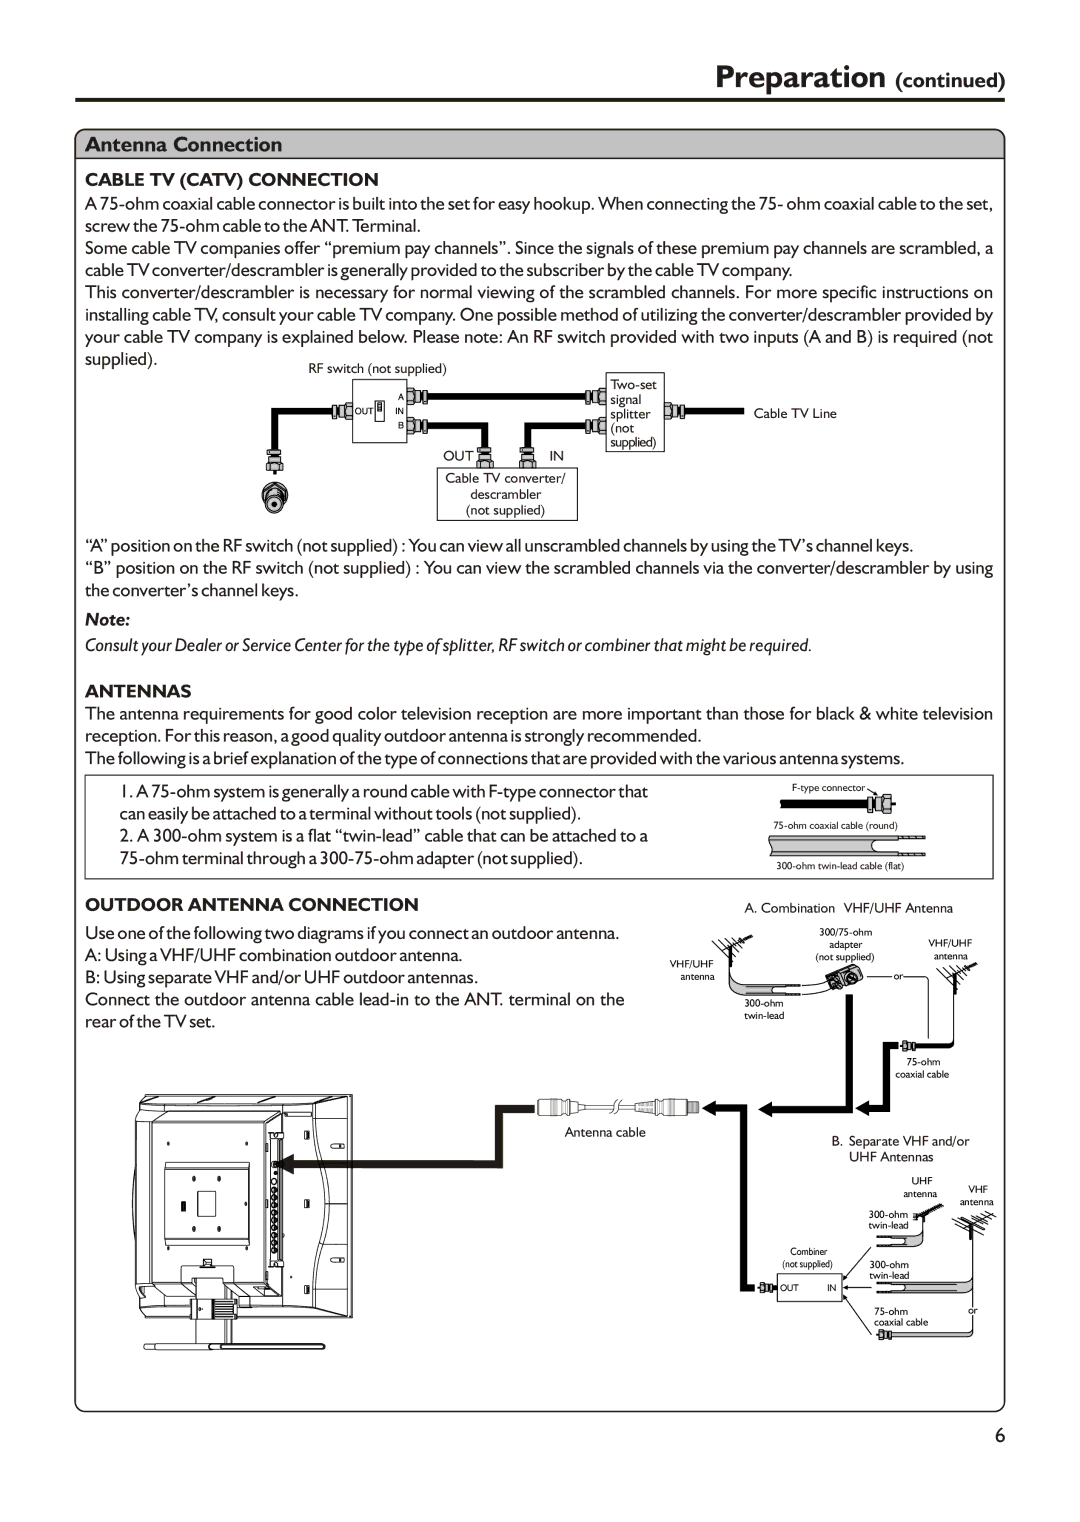 Audiovox FPE2305 manual Preparation, Antenna Connection 